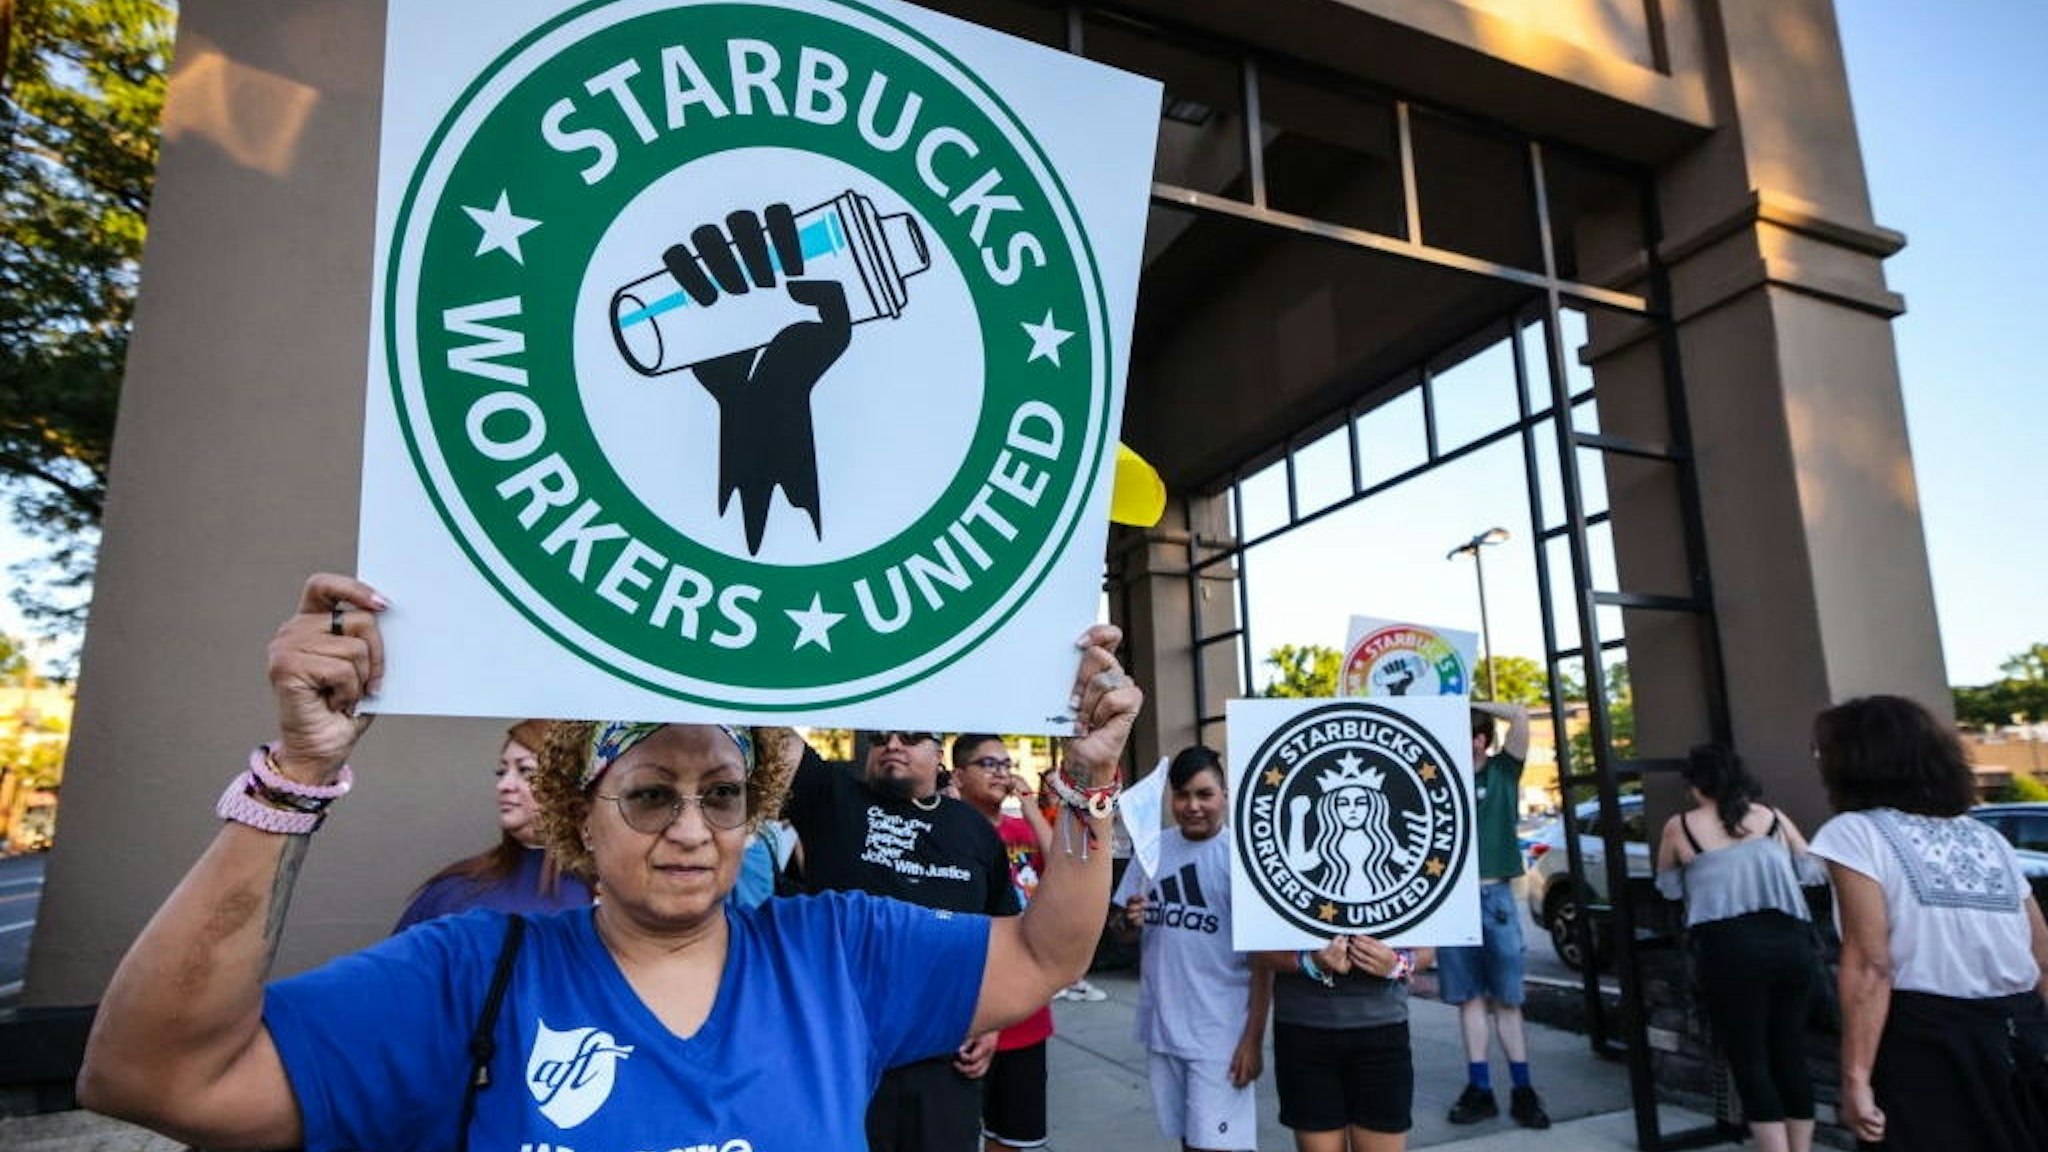 Great Neck, N.Y.: A woman holds up a sign as she joins other protestors in a rally against what they perceive to be union busting tactics, outside a Starbucks in Great Neck, New York, demanding the reinstatement of a former employee on August 15, 2022. (Photo by Thomas A. Ferrara/Newsday RM via Getty Images)